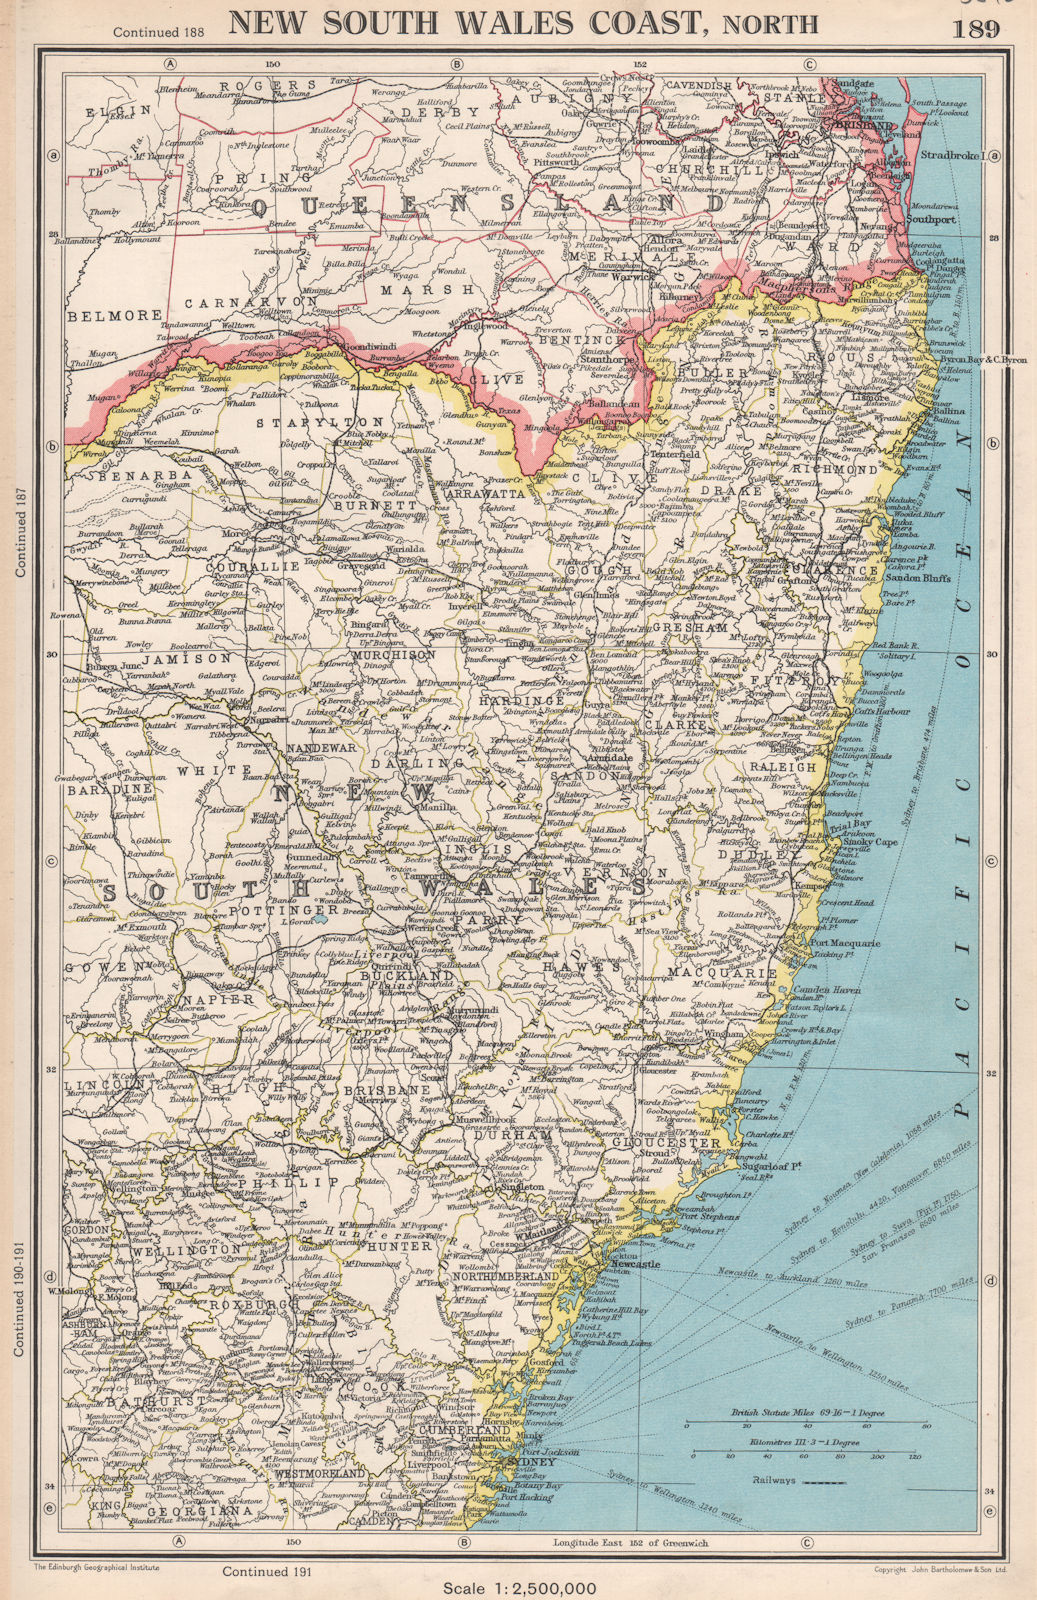 Associate Product NEW SOUTH WALES COAST, NORTH. showing counties. BARTHOLOMEW 1952 old map